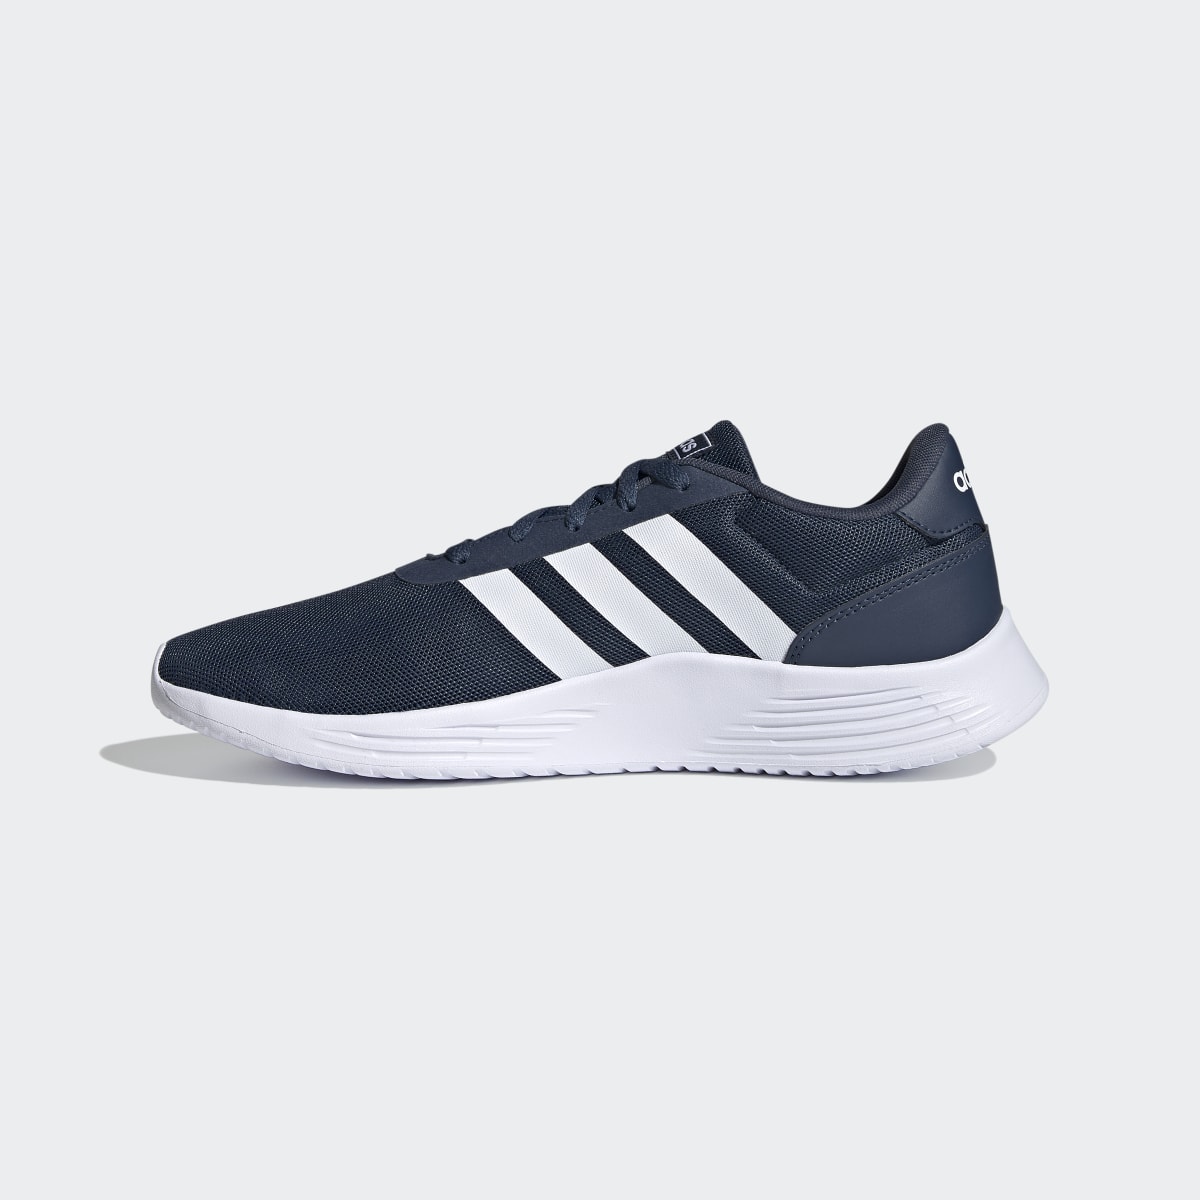 Adidas Lite Racer 2.0 Shoes. 7